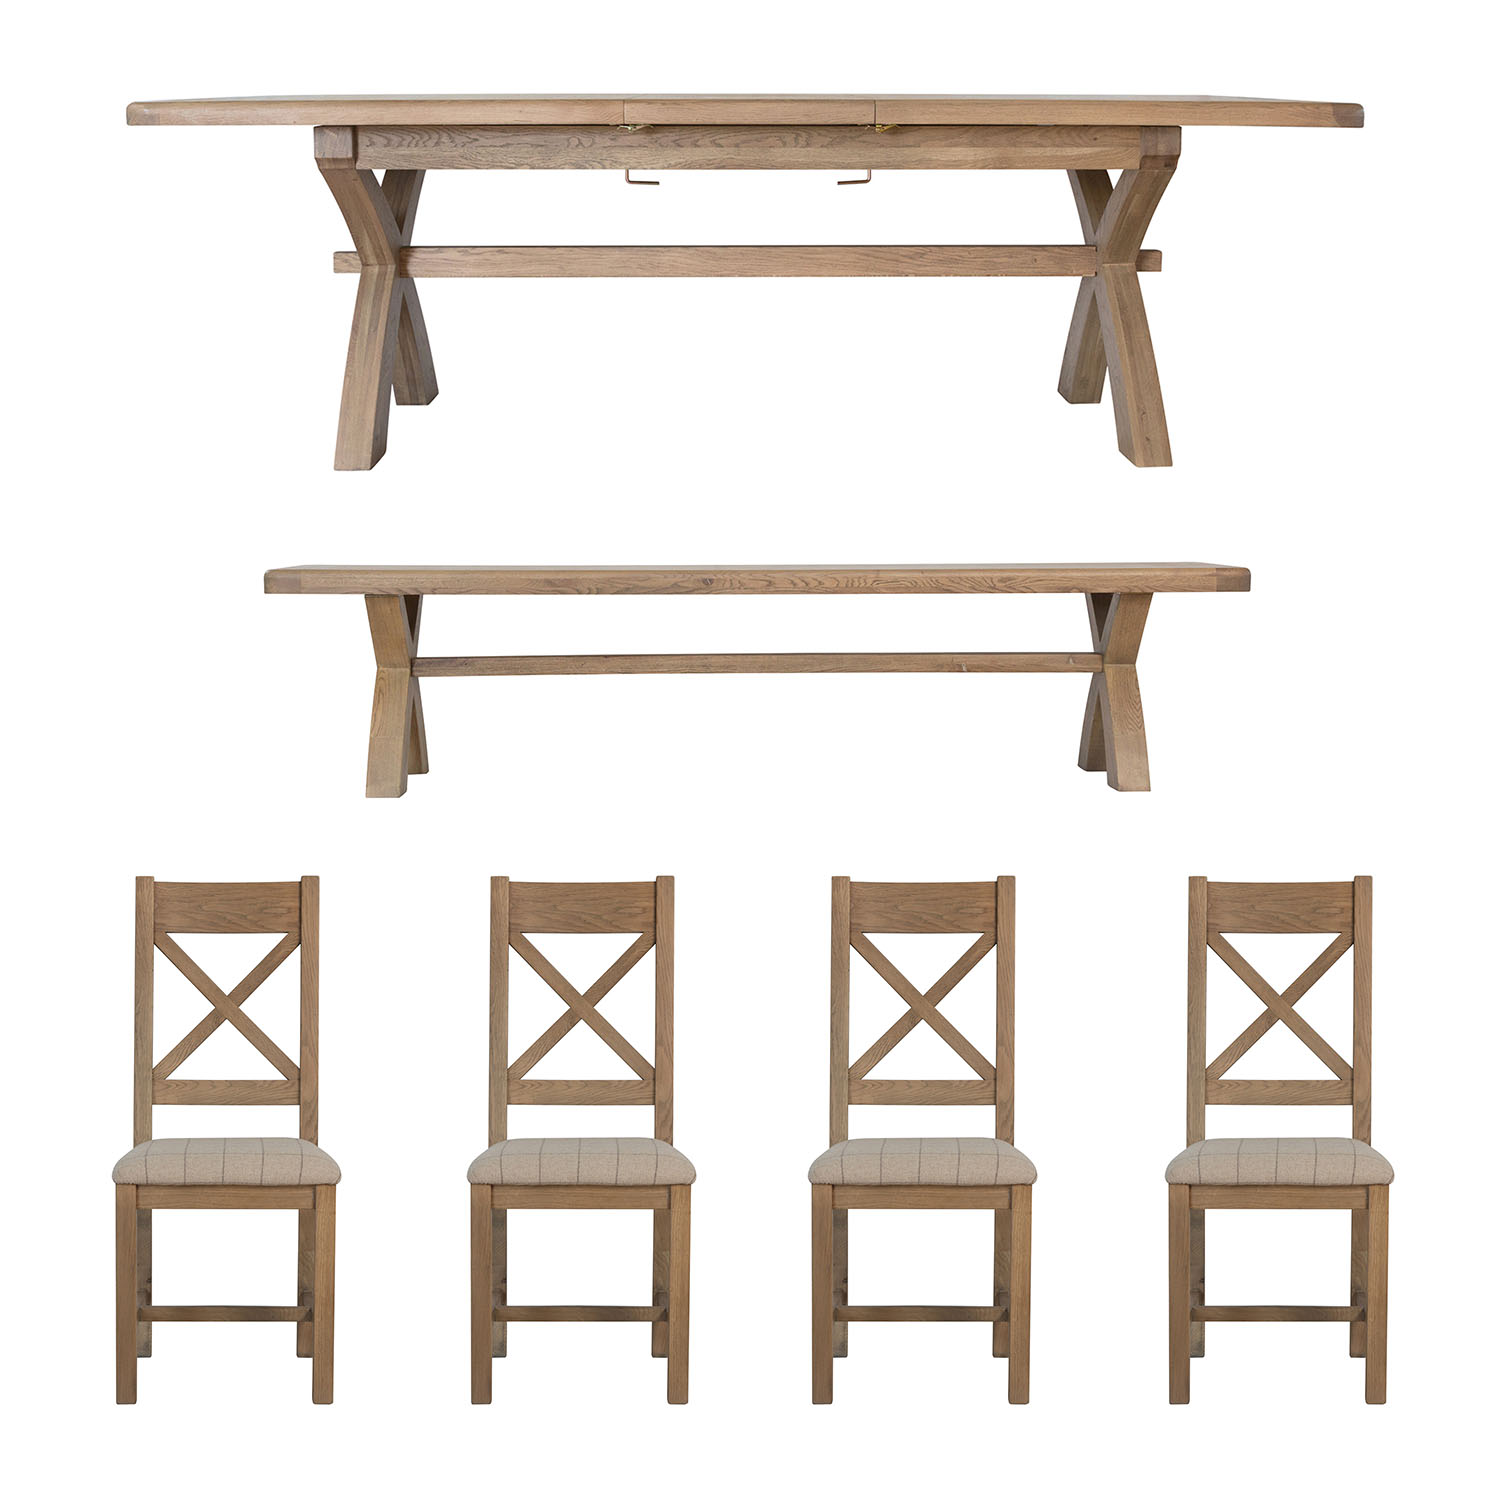 Heritage Oak 2.0m Table + Bench + x4 Cross Back Natural Chairs Set